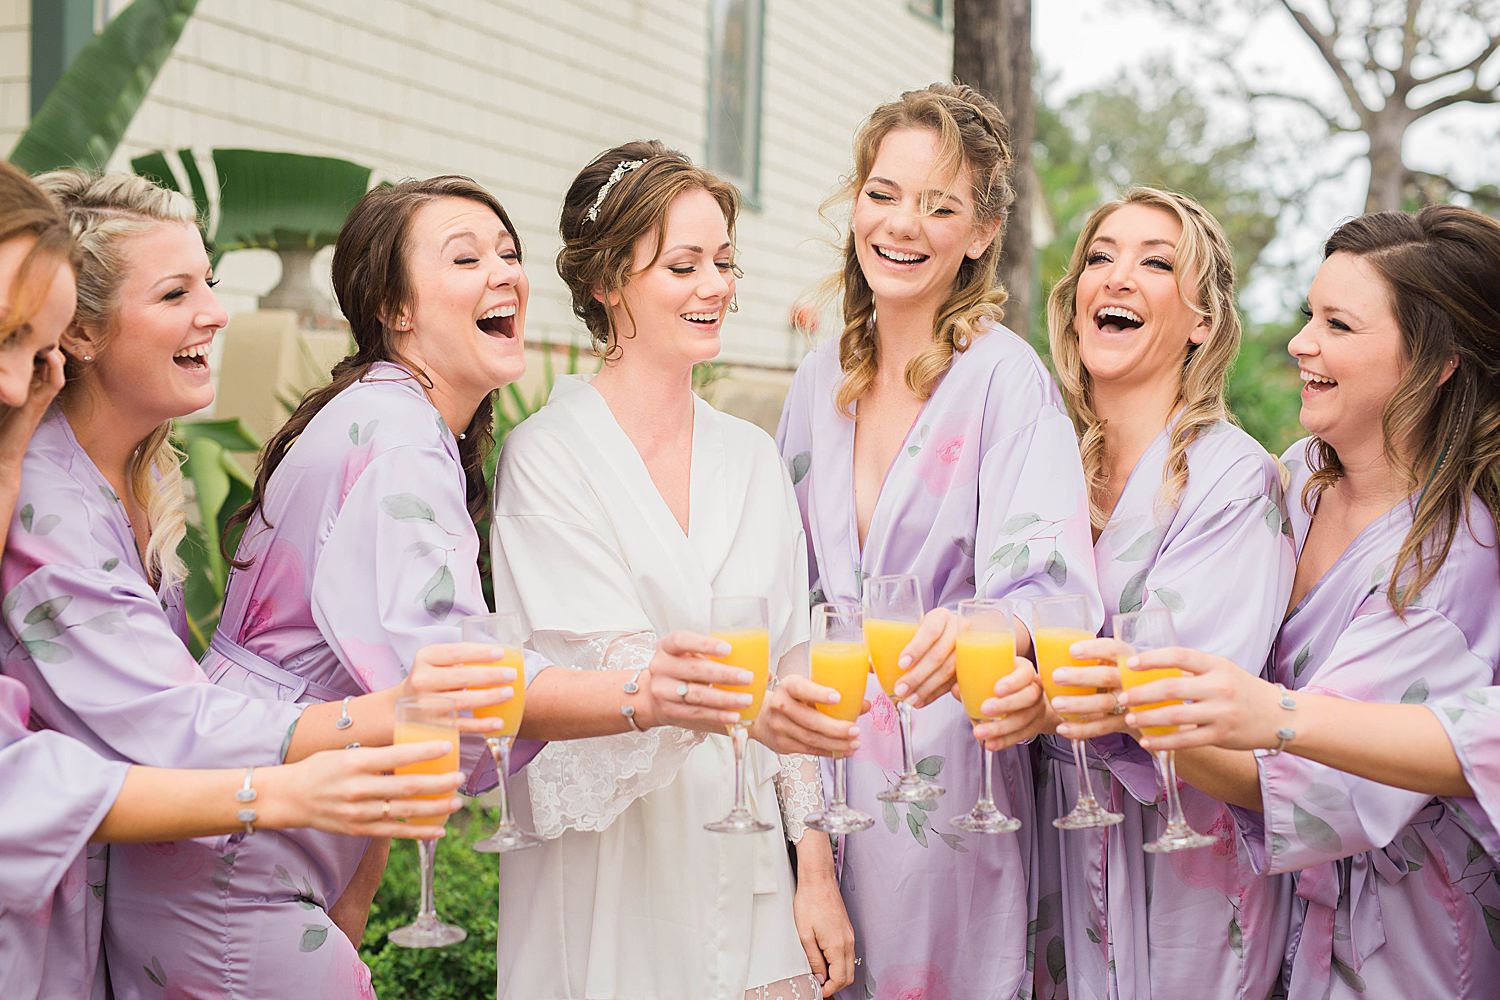 Bride and her bridesmaids share a laugh over a champagne toast